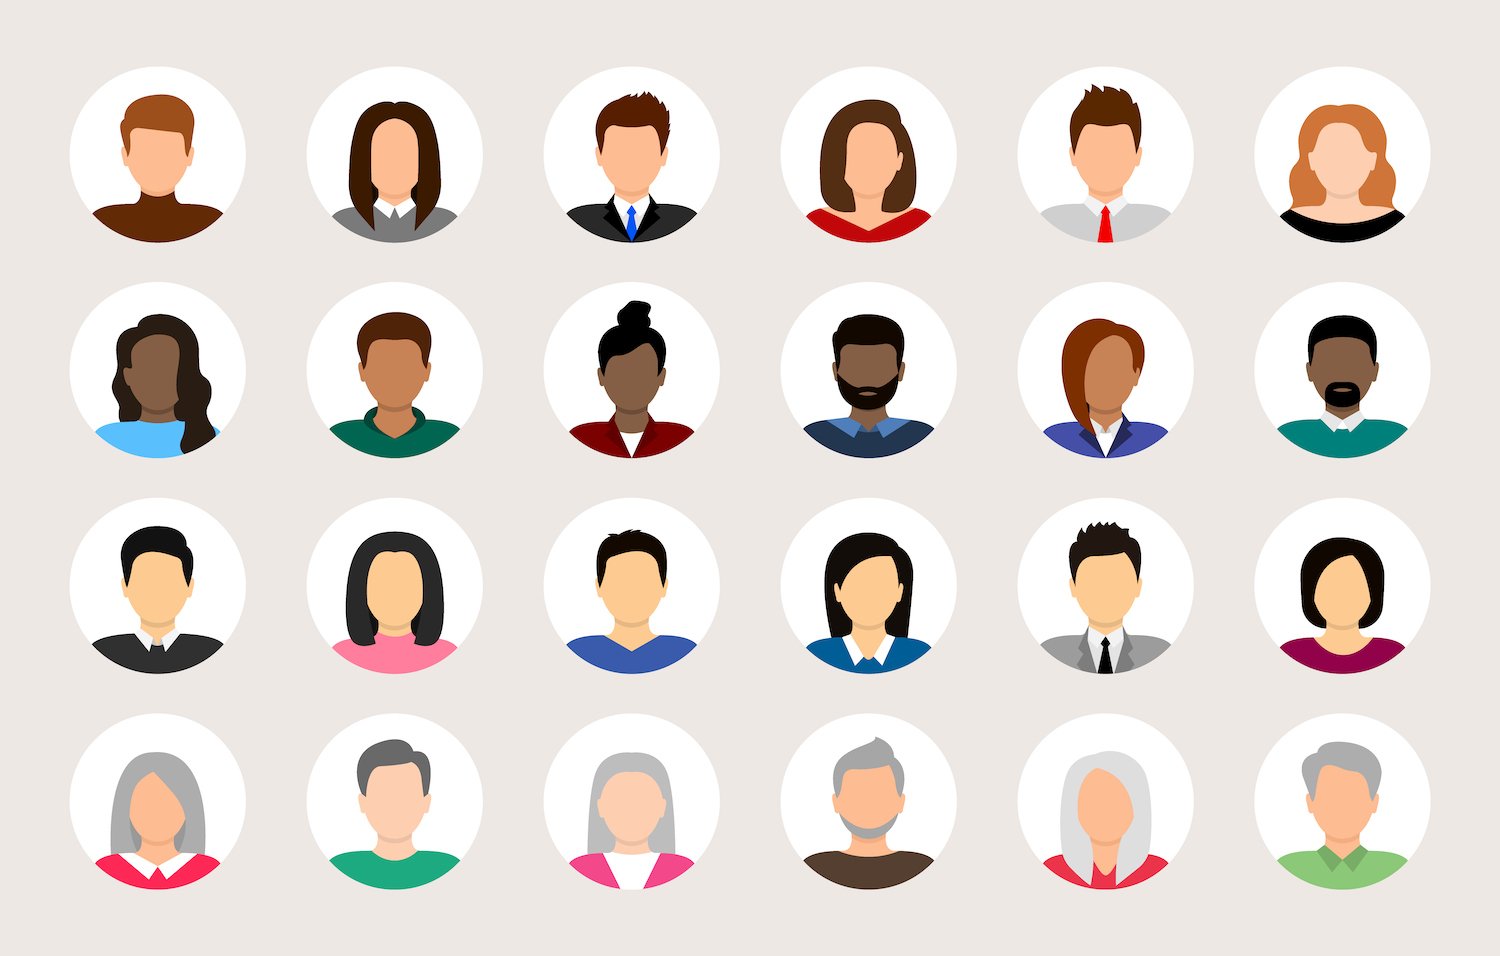 People avatar set. Diverse people avatar profile icons. User avatar. Male and female faces different nationalities. Men and women portraits. Characters collection. Vector illustration.